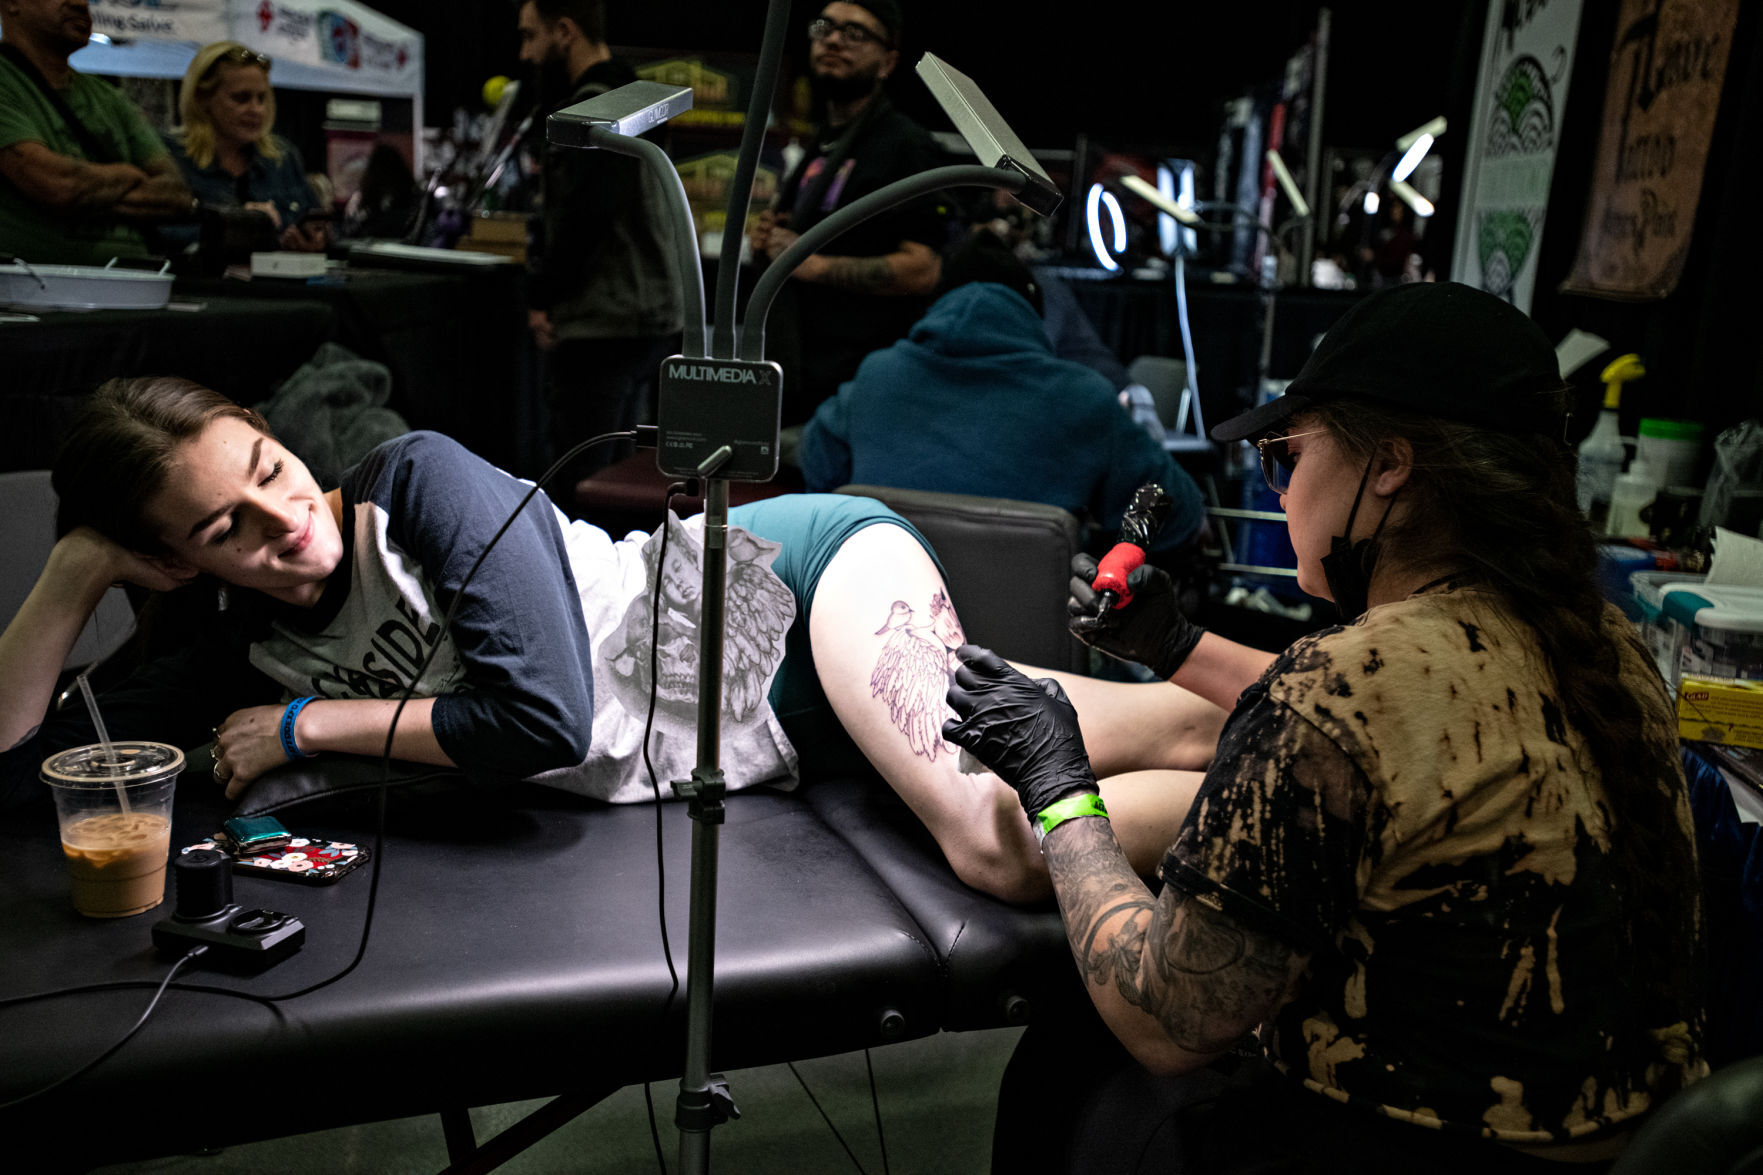 Tattoo artists from across the country are ready to ink you up in Wildwood